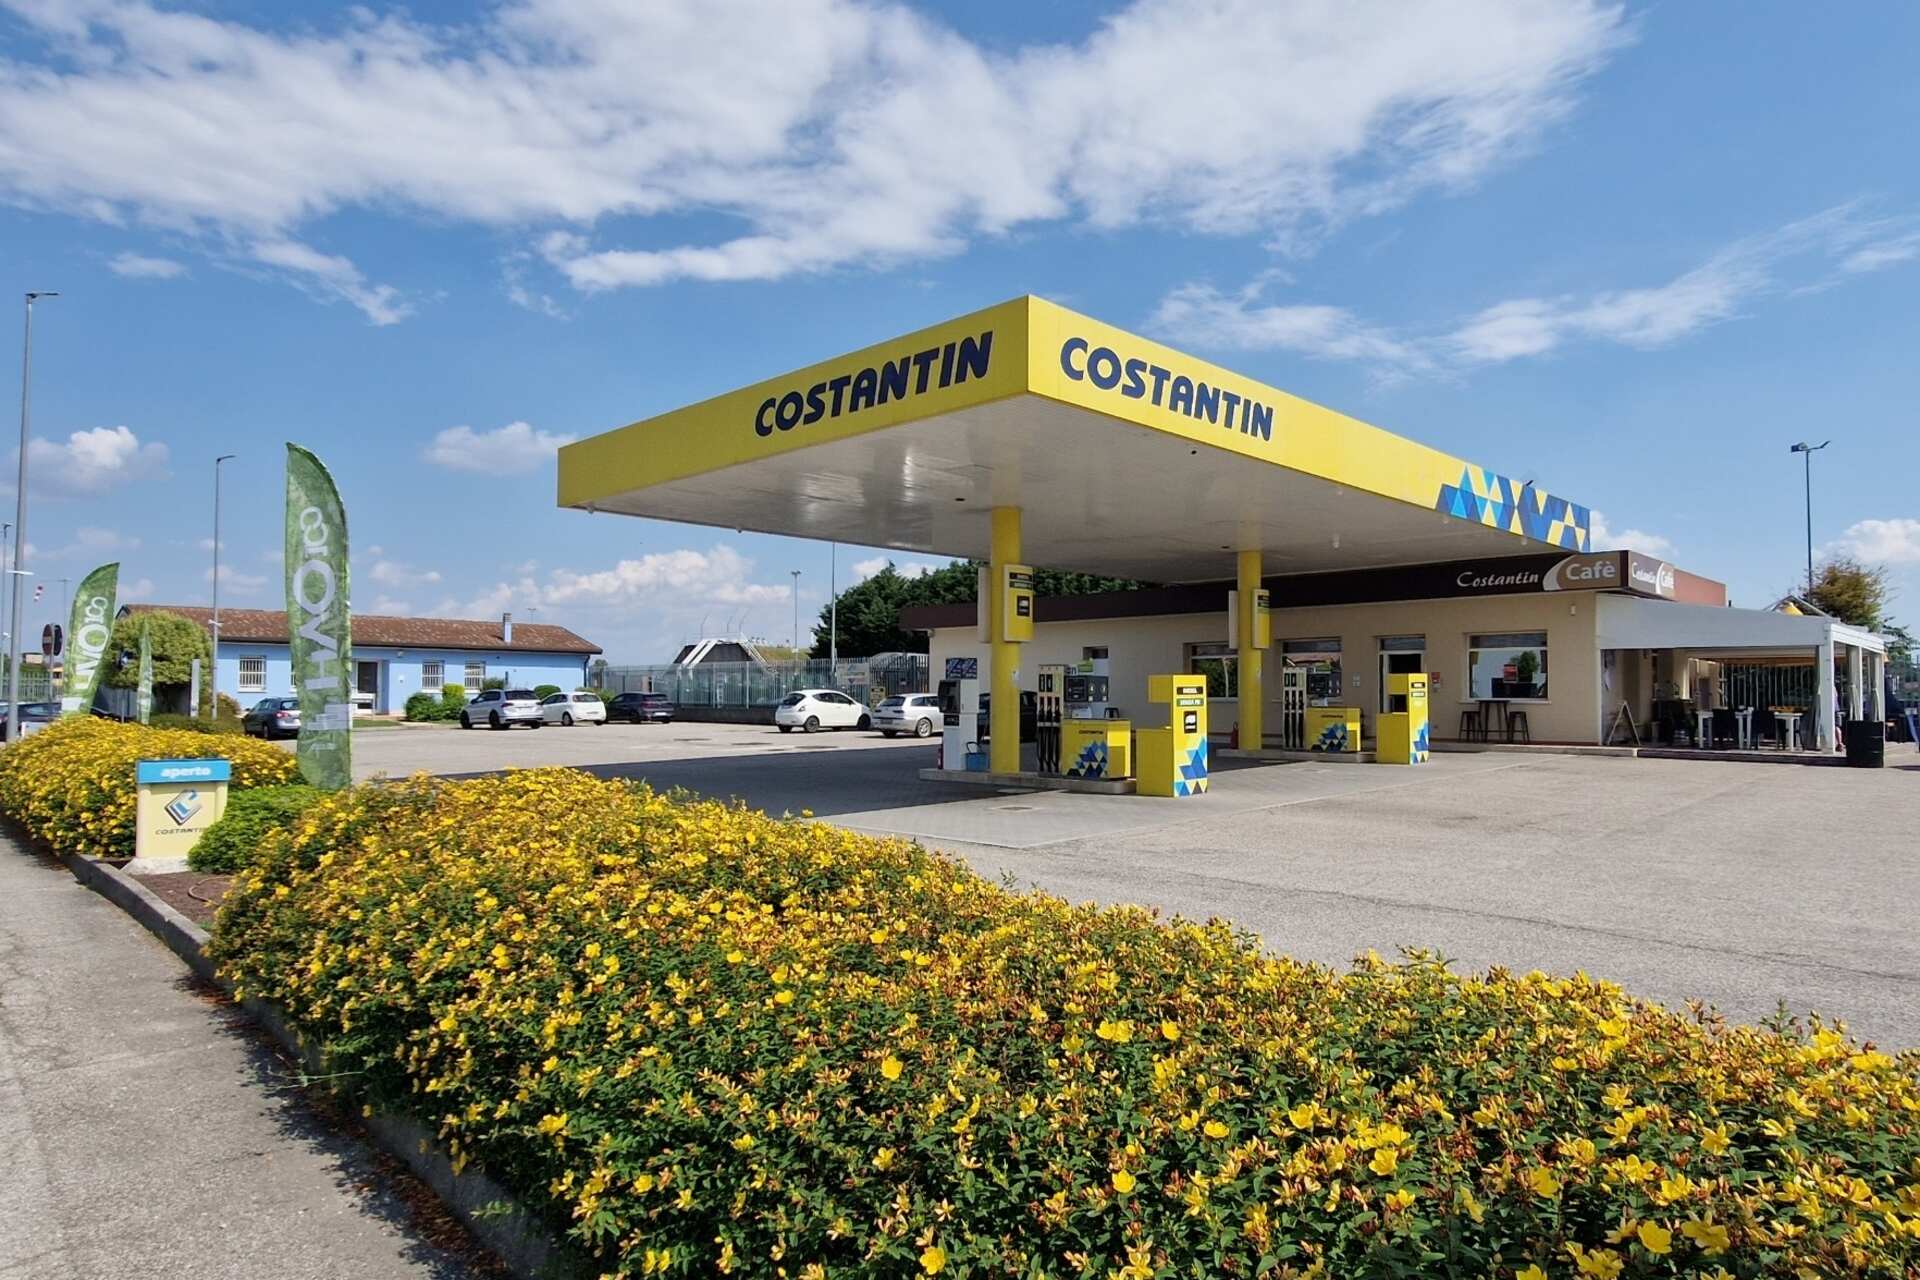 Biodiesel: the Costantin service station in Merlara, in the province of Padua, sells exclusively HVO100 or Hydrogenated Vegetable Oil